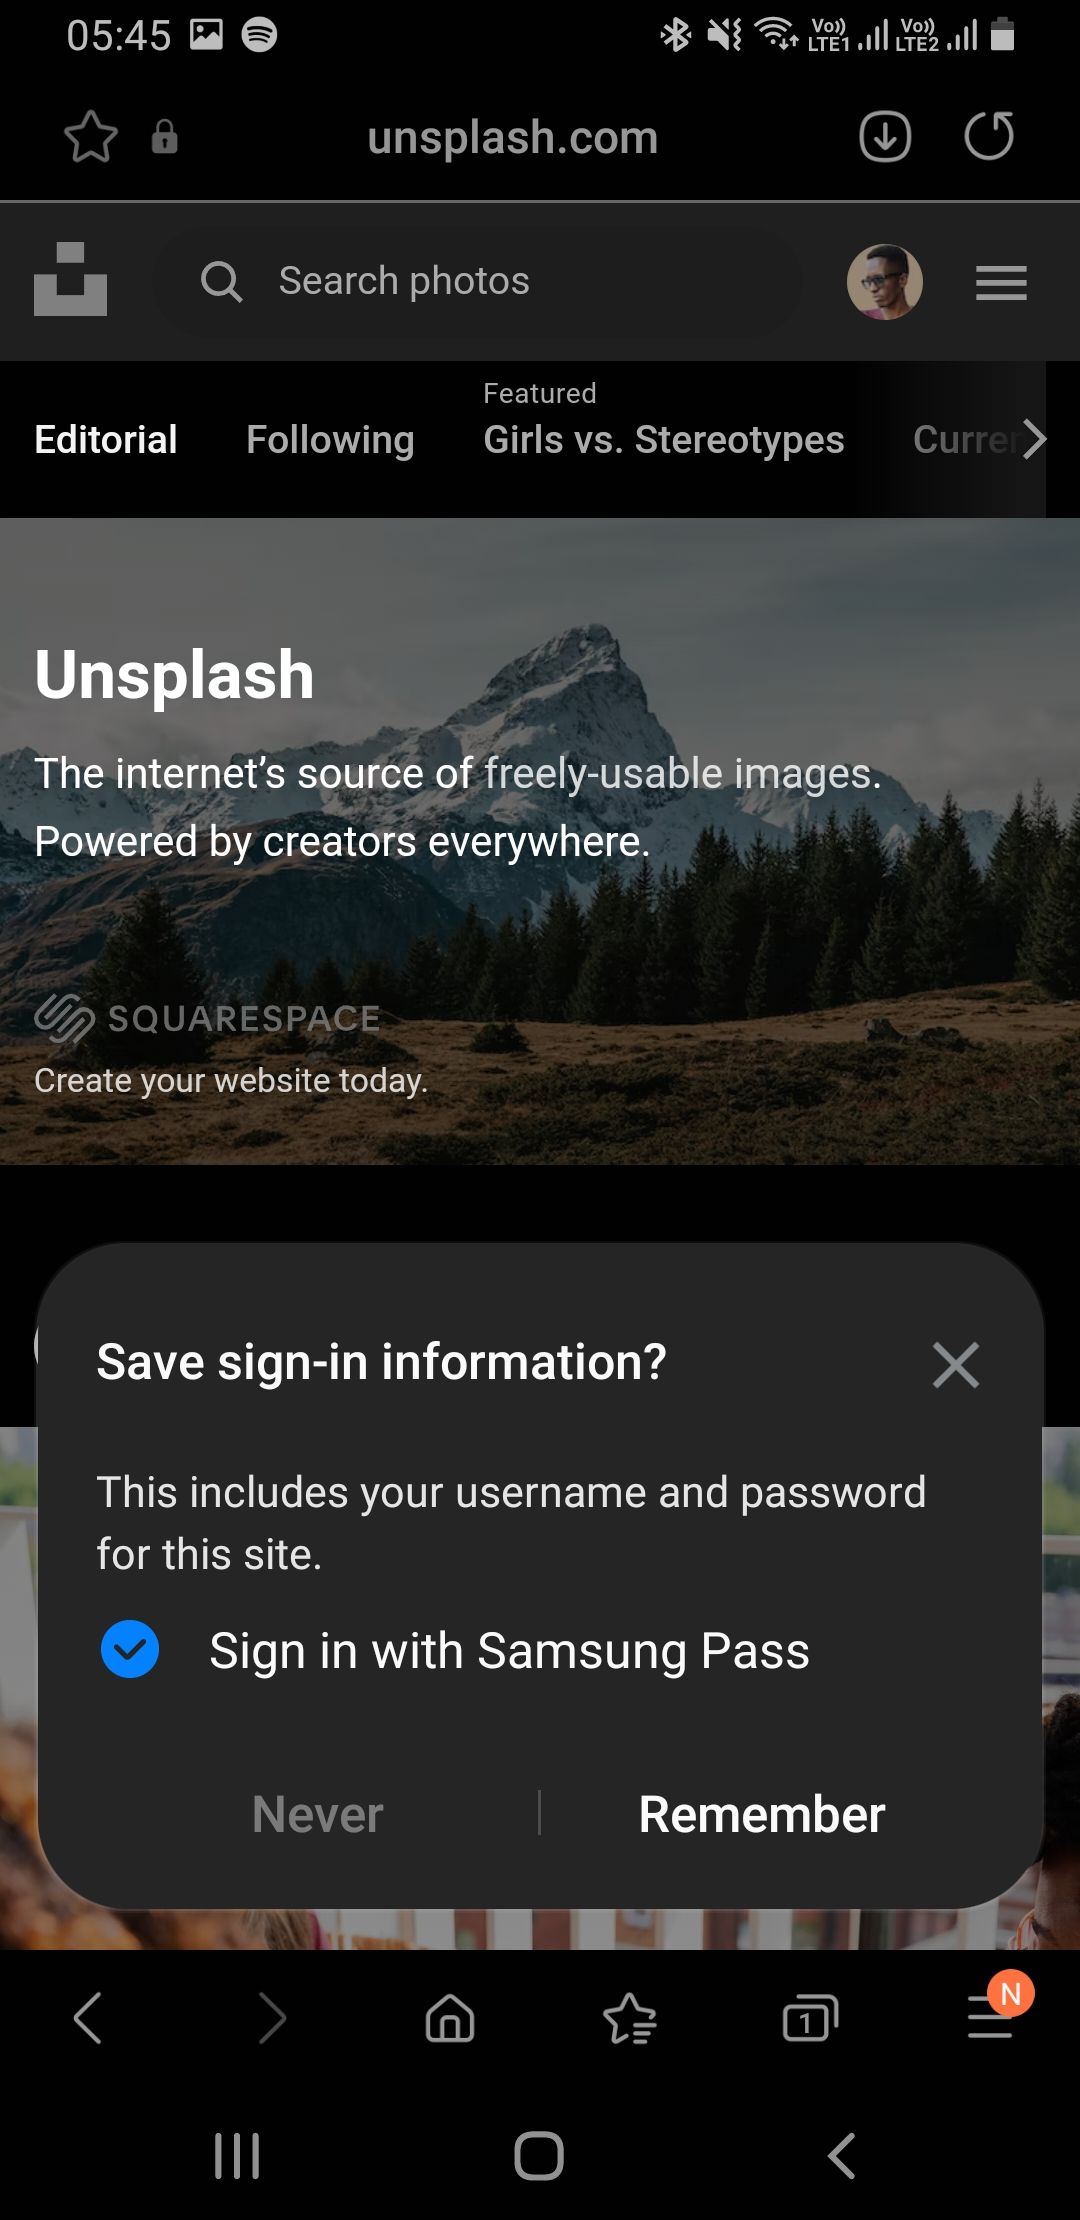 Samsung Pass Remember prompt on browser